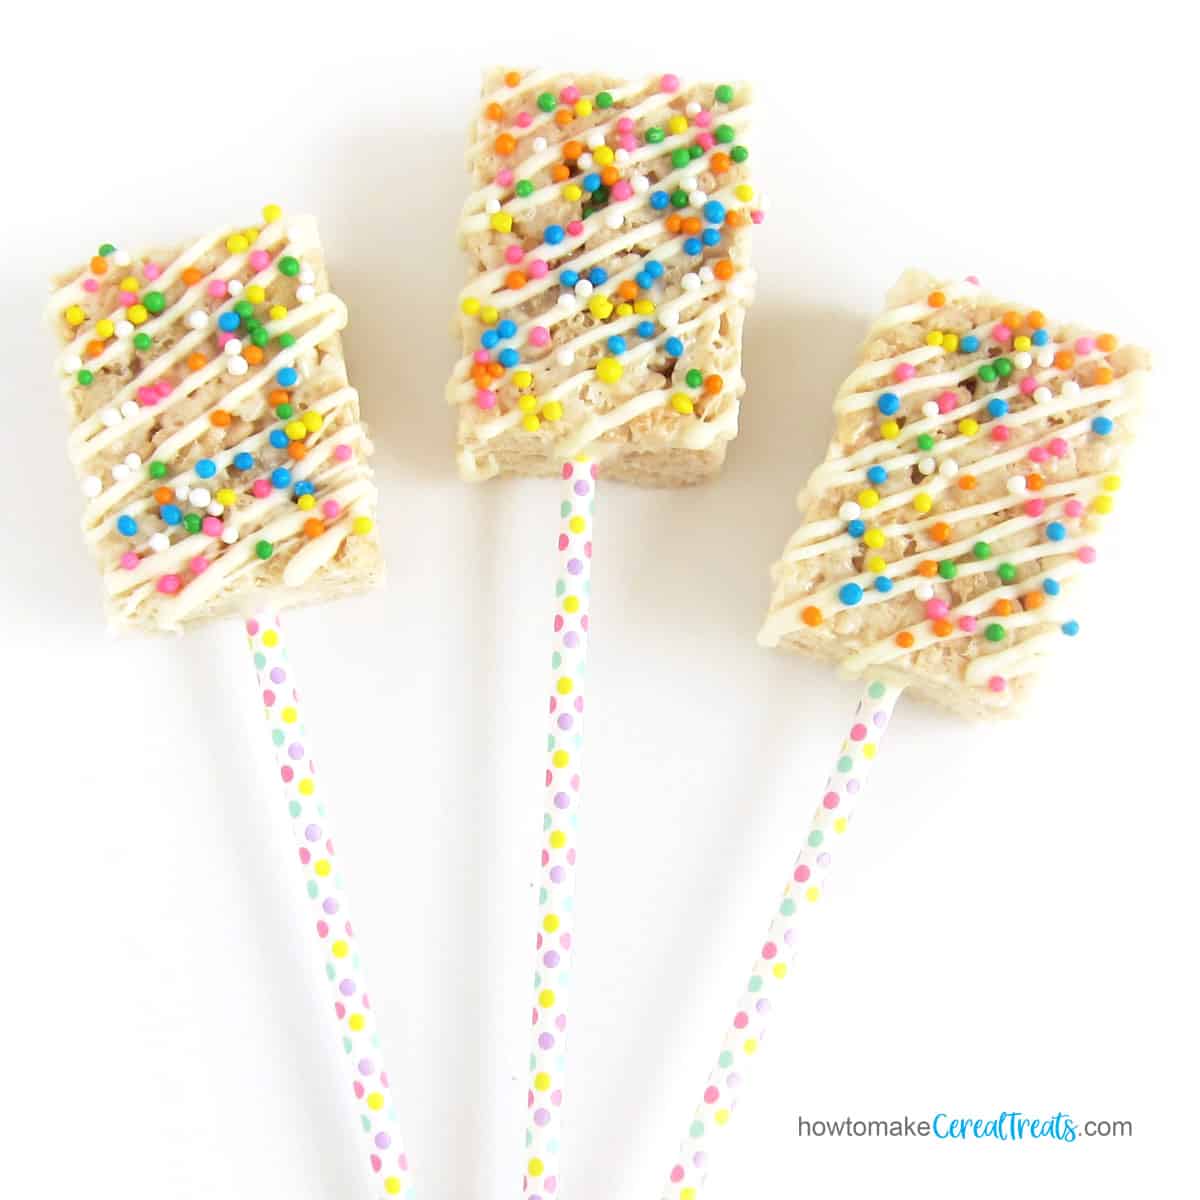 Rice Krispie treat lollipops drizzled with white chocolate and topped with rainbow Crispearls sprinkles.